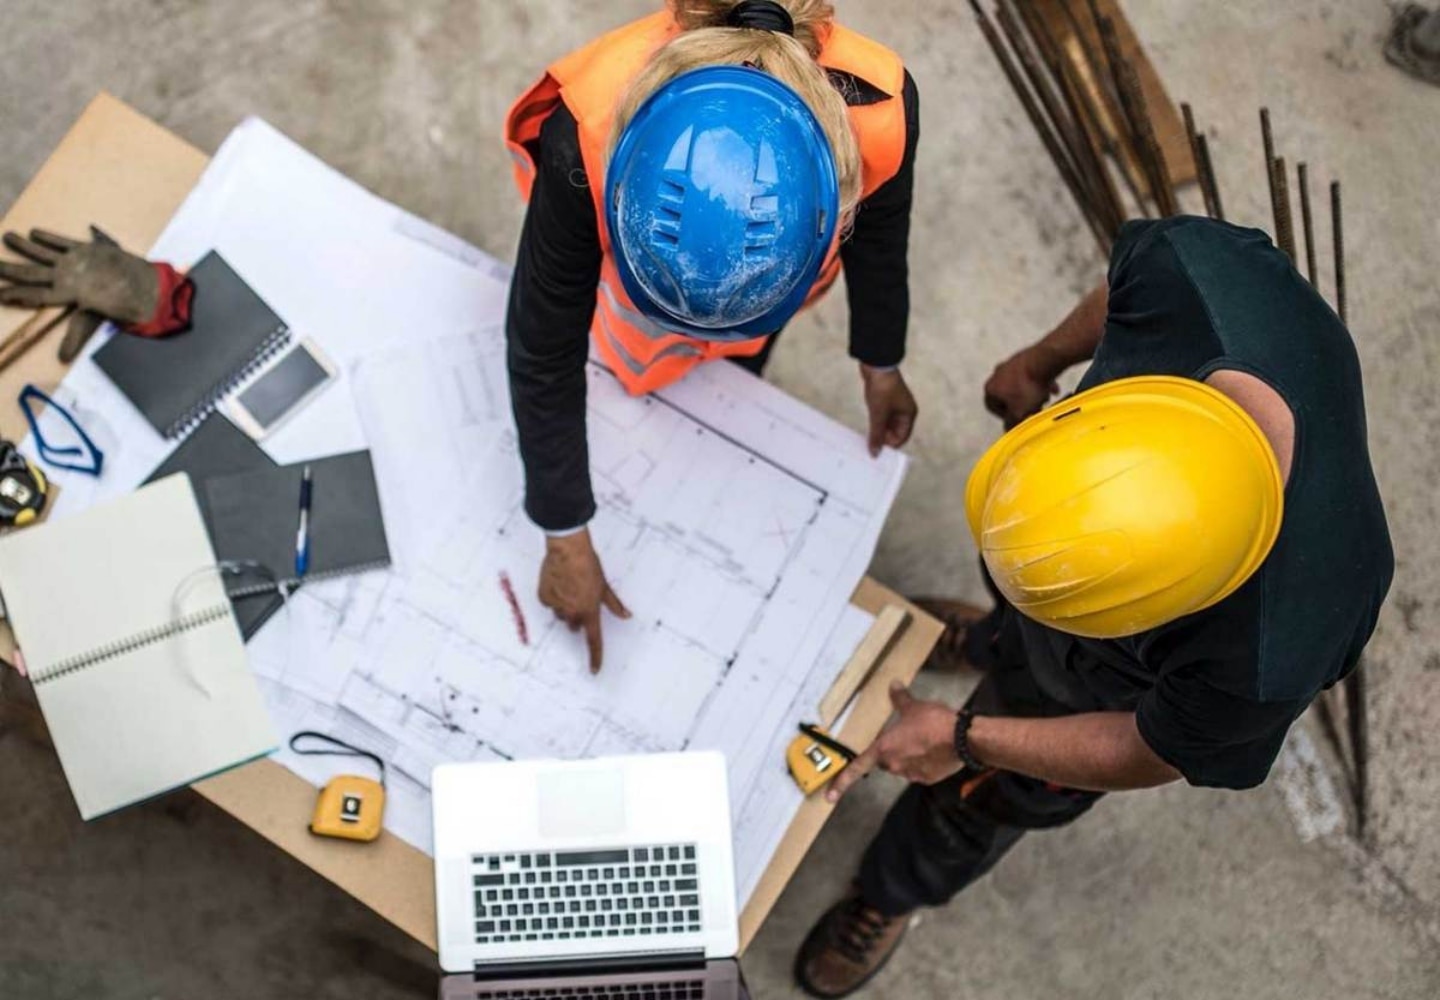 Top view of two people looking construction plan next to a laptop